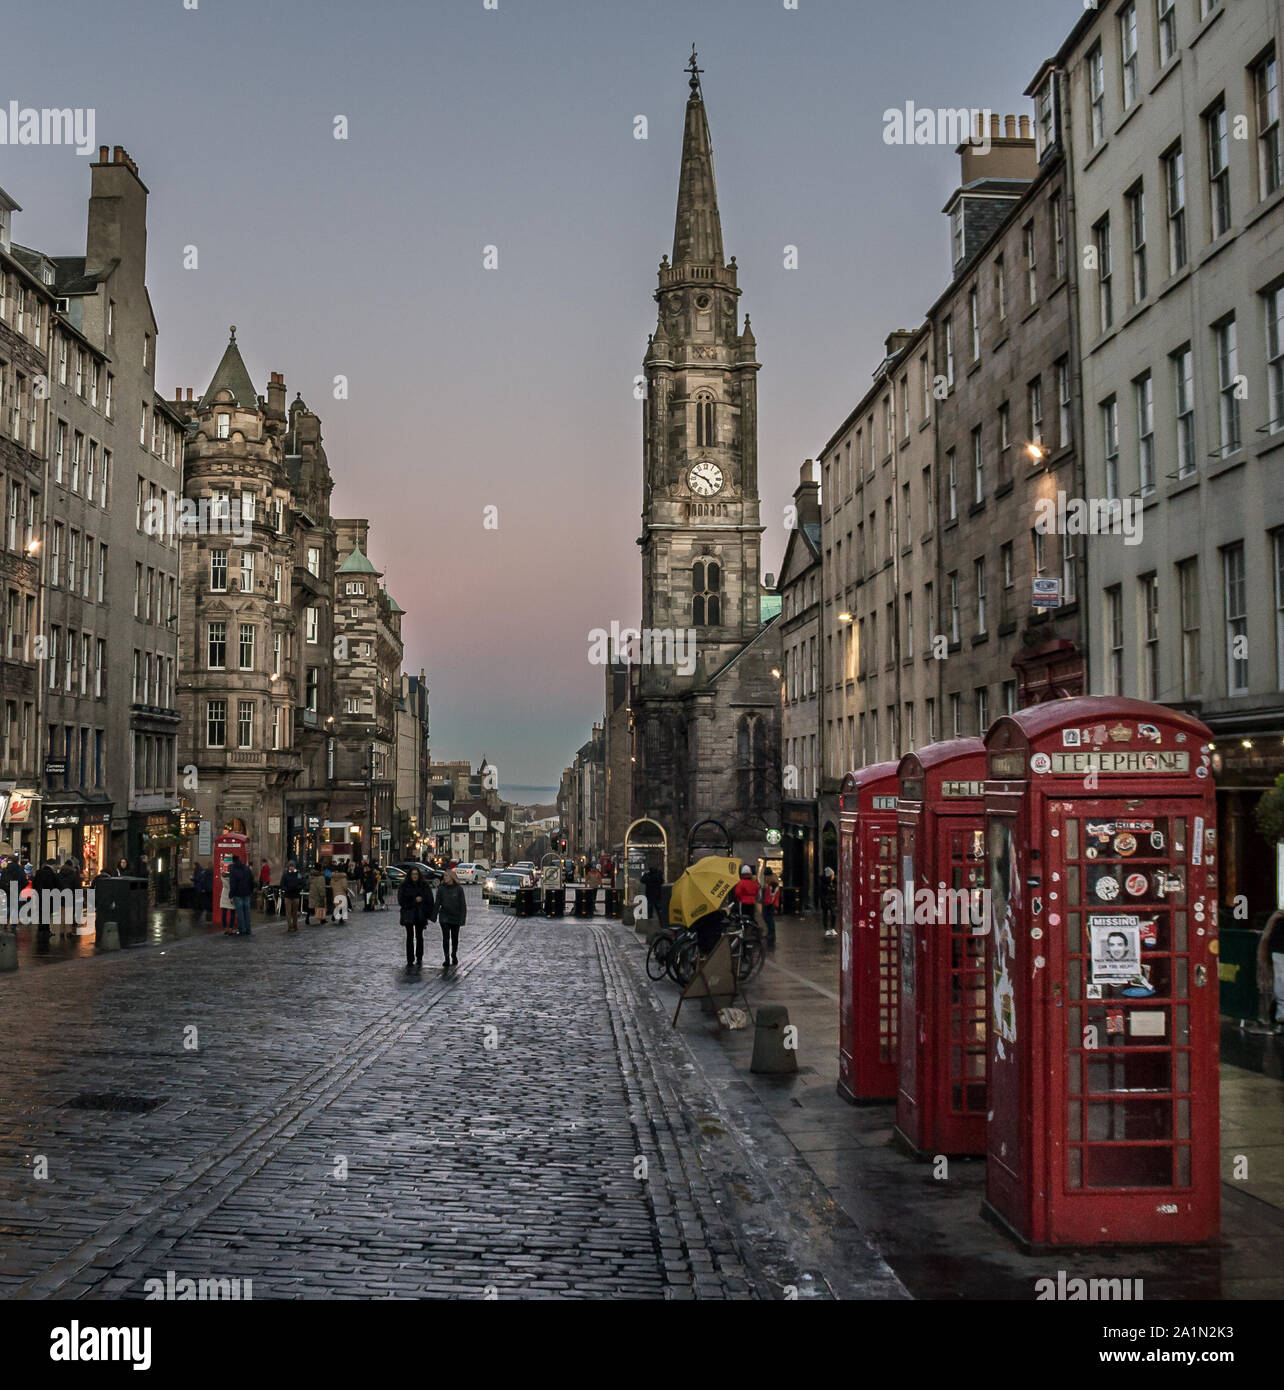 High Street in the Old Town's Royal Mile at Blue Hour. Pink and blue sky, people walking in wet cobblestone street. Red phone boxes in forground Stock Photo